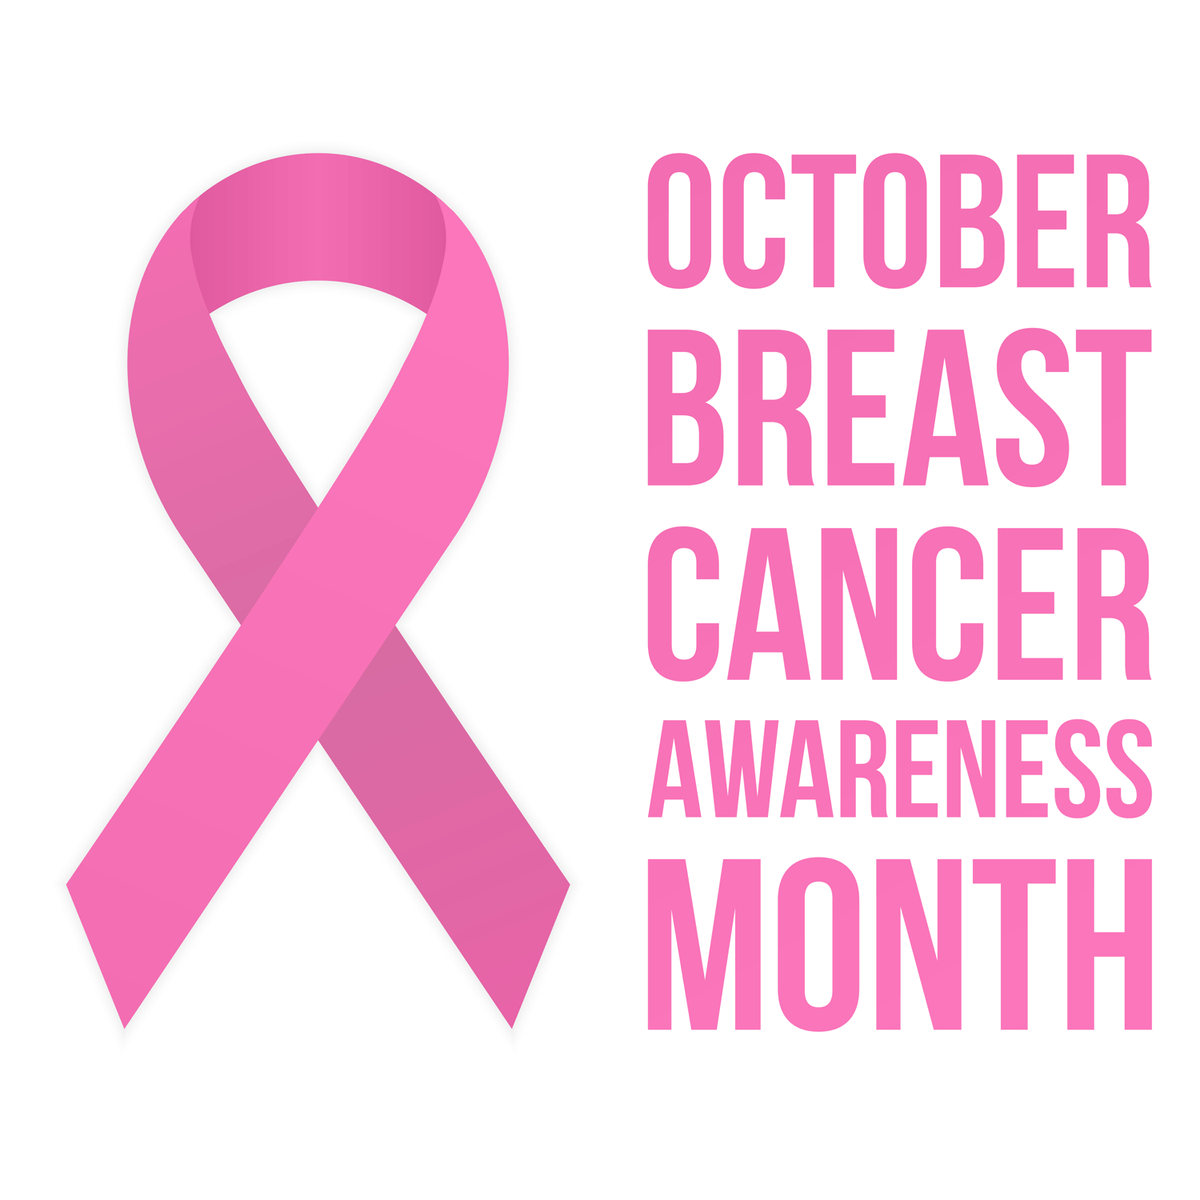 During Breast Cancer Awareness Month we seek to raise awareness about the disease and raise funds for research. #TeamUHDB #breastcancerawareness #PLSU